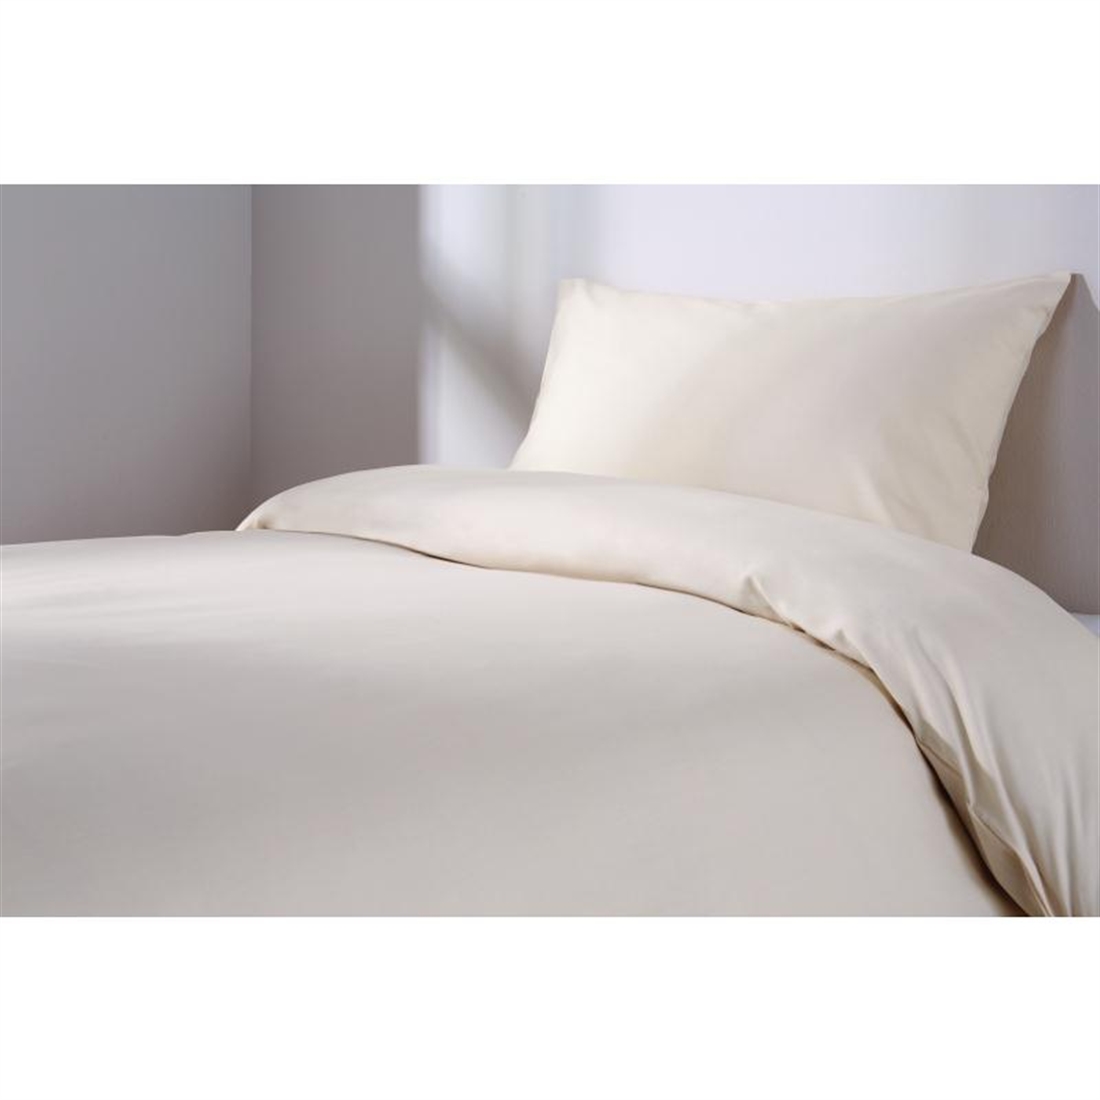 Mitre Essentials Spectrum Fitted Sheet Ivory Double